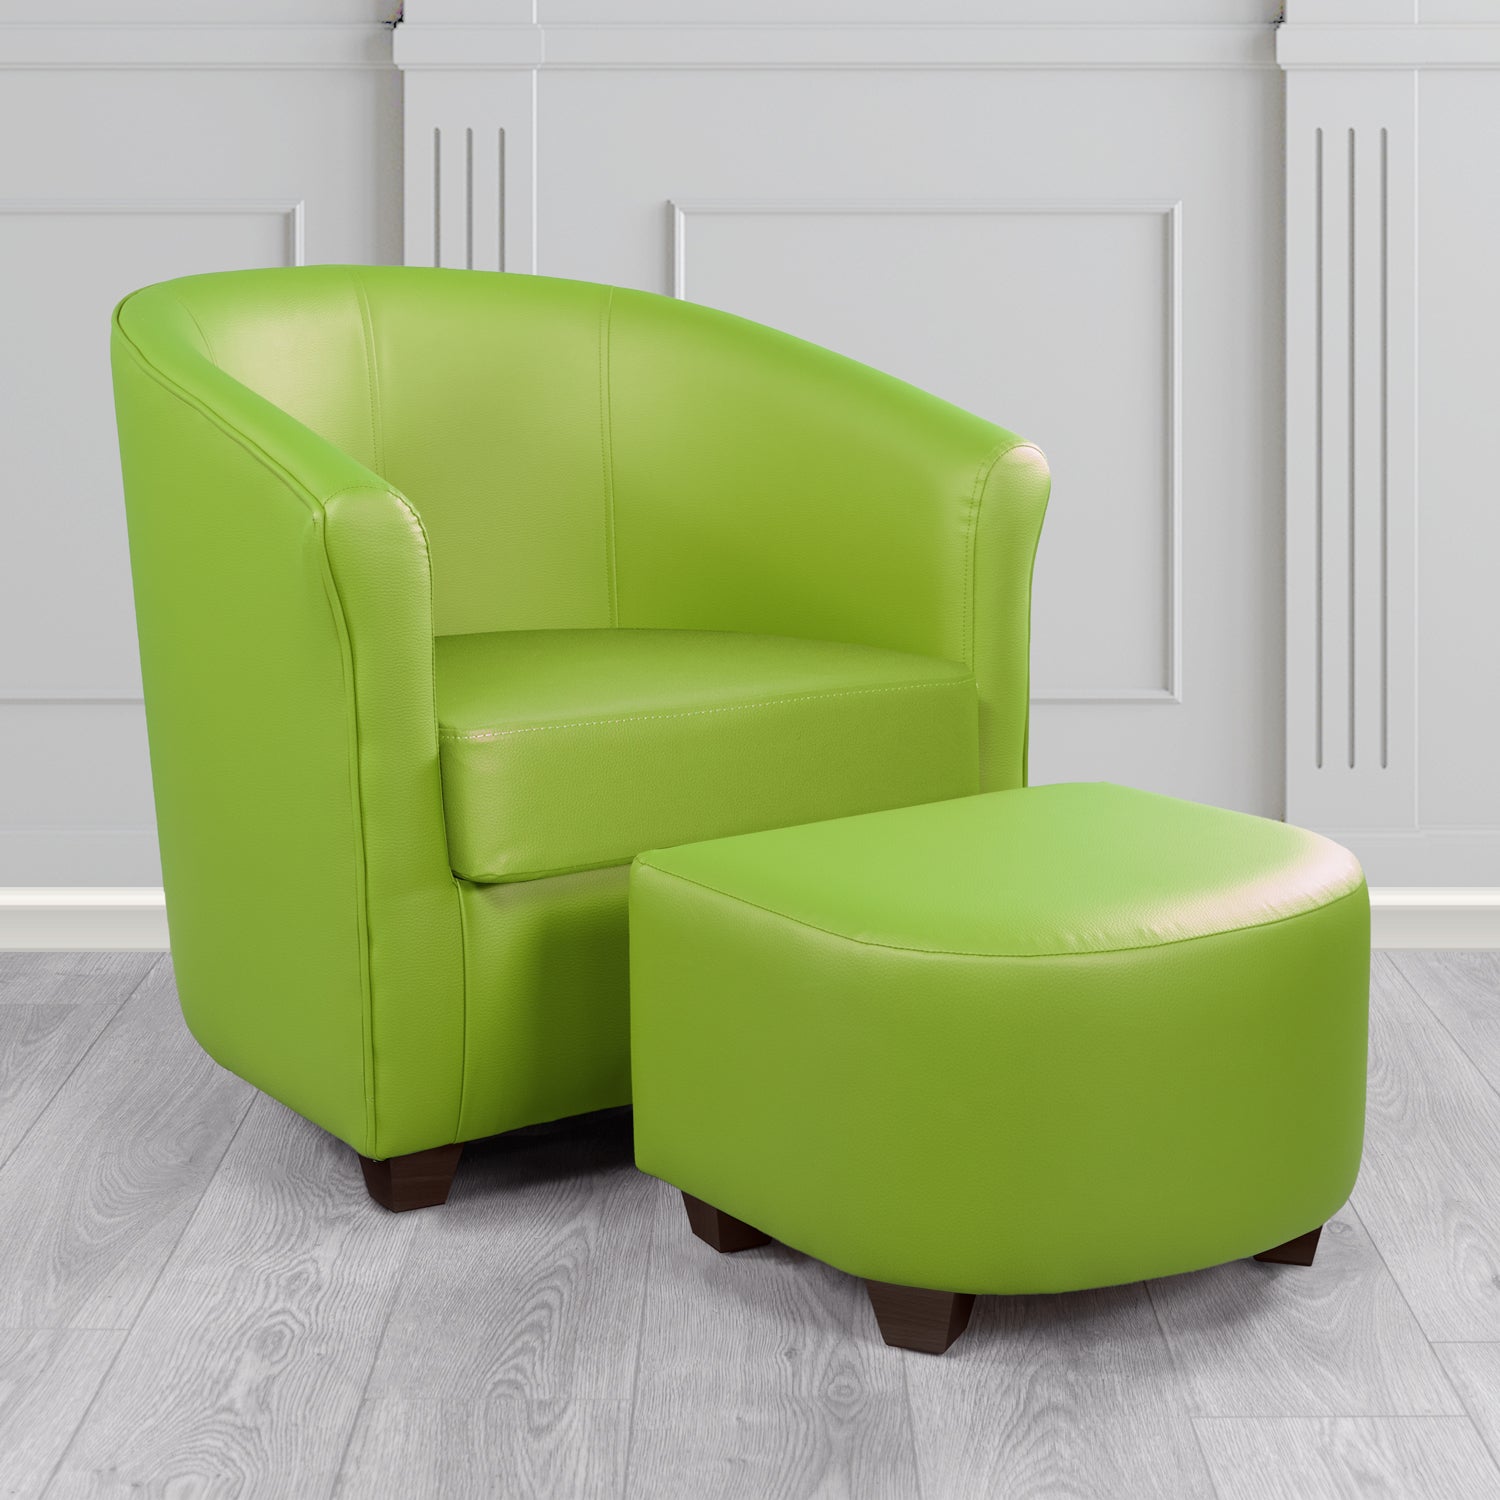 Cannes Tub Chair with Footstool Set in Just Colour Citrus Green Crib 5 Faux Leather - The Tub Chair Shop